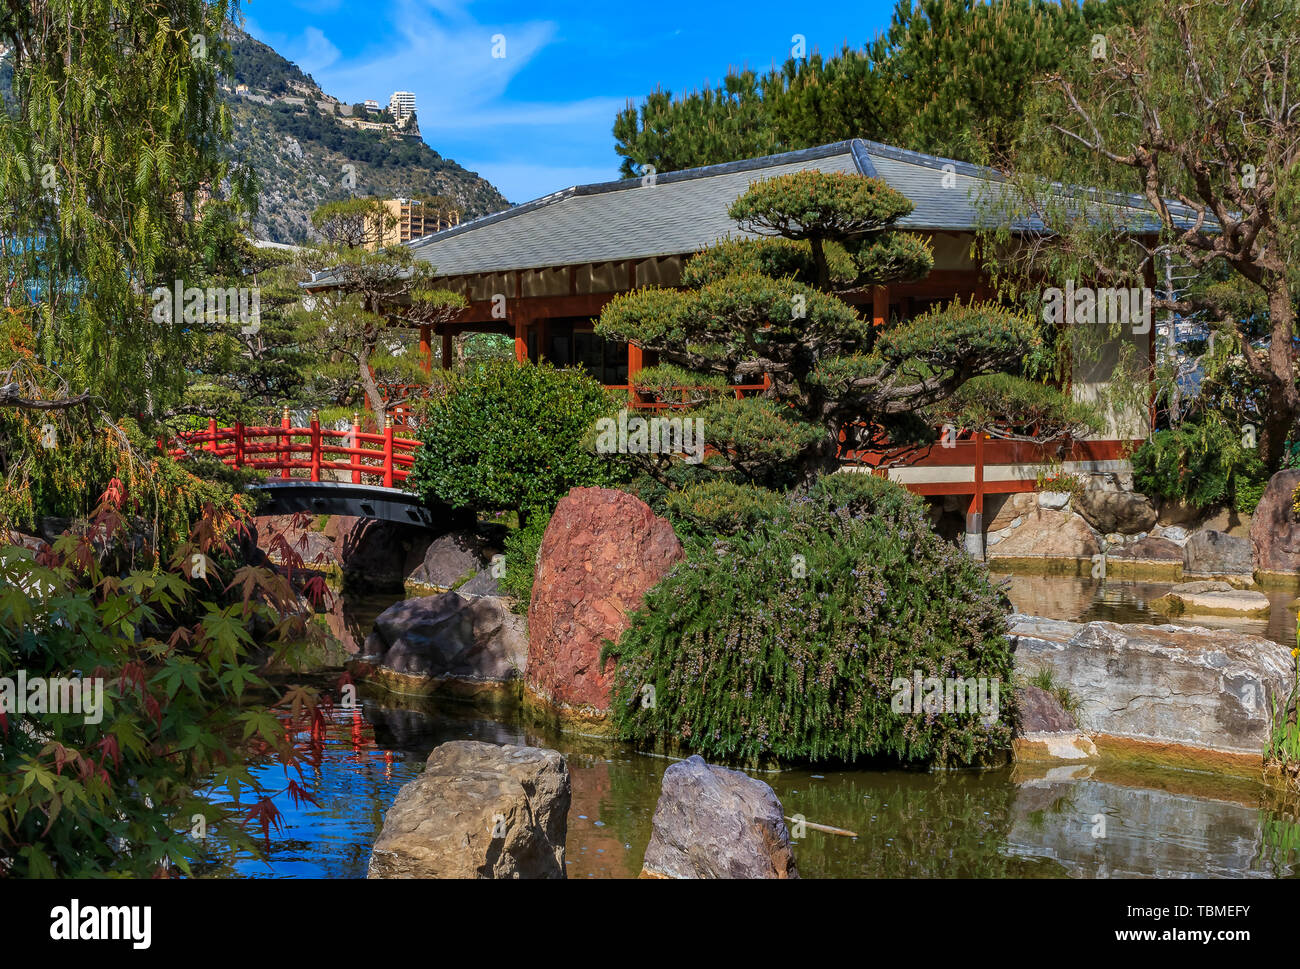 Red pagoda and a koi pond in the tranquil Japanese Garden or Jardin Japonais in Monaco, Monte Carlo Stock Photo